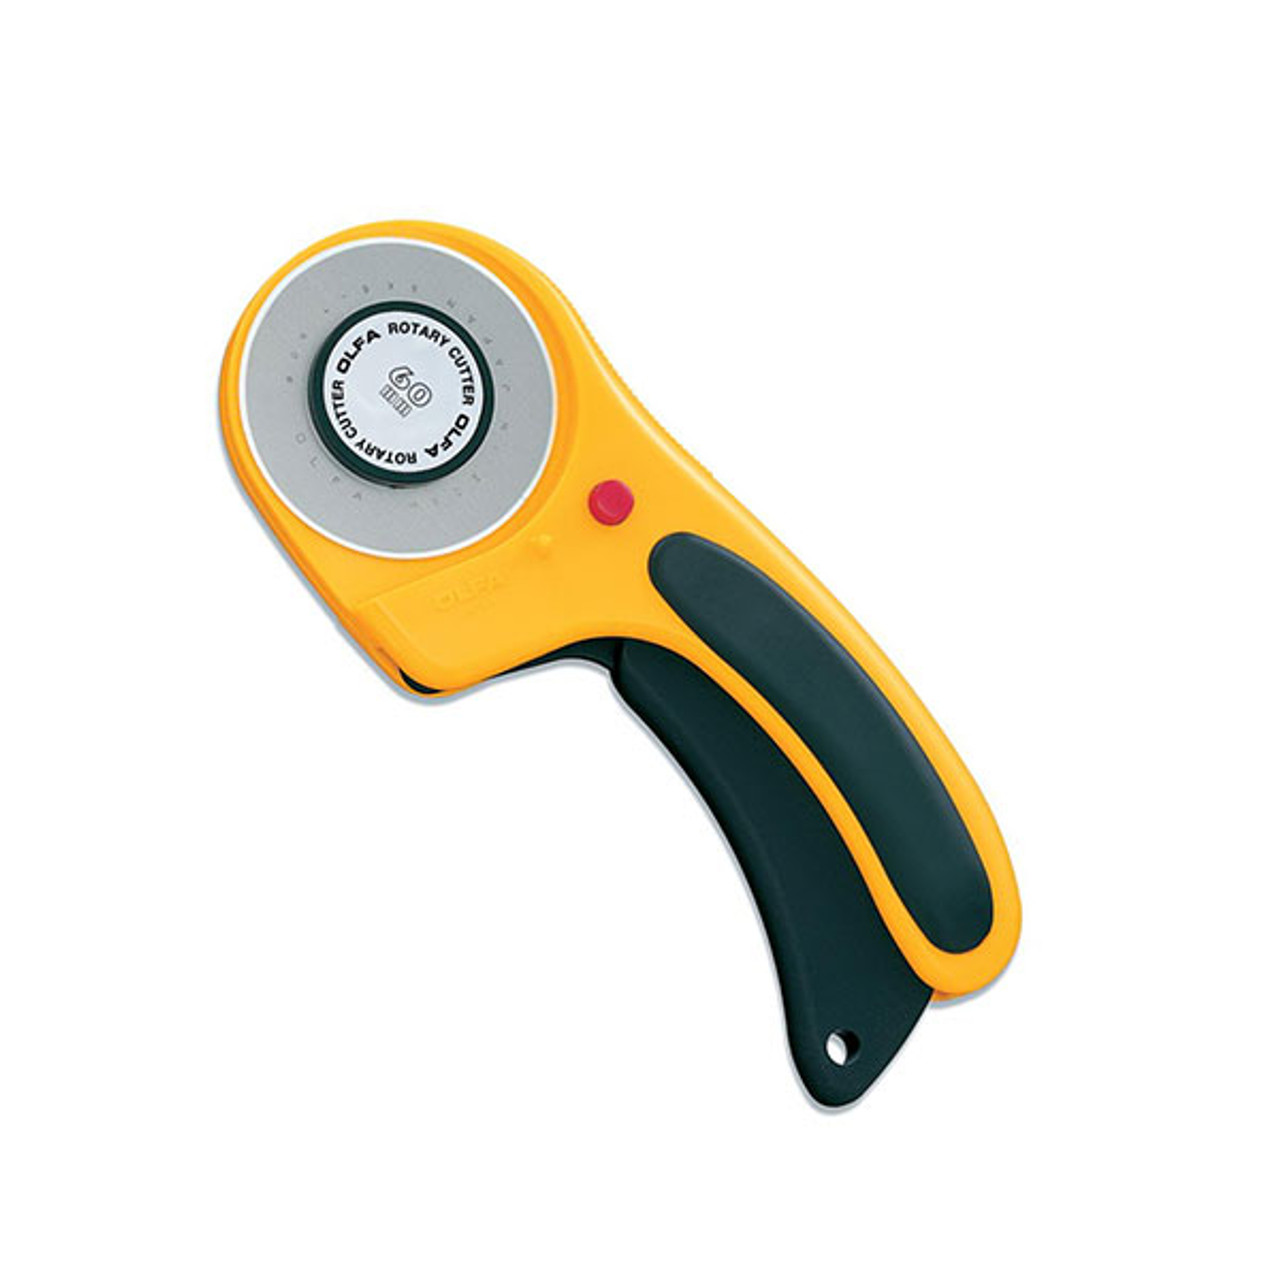 OLFA Deluxe Rotary Cutter - 60mm